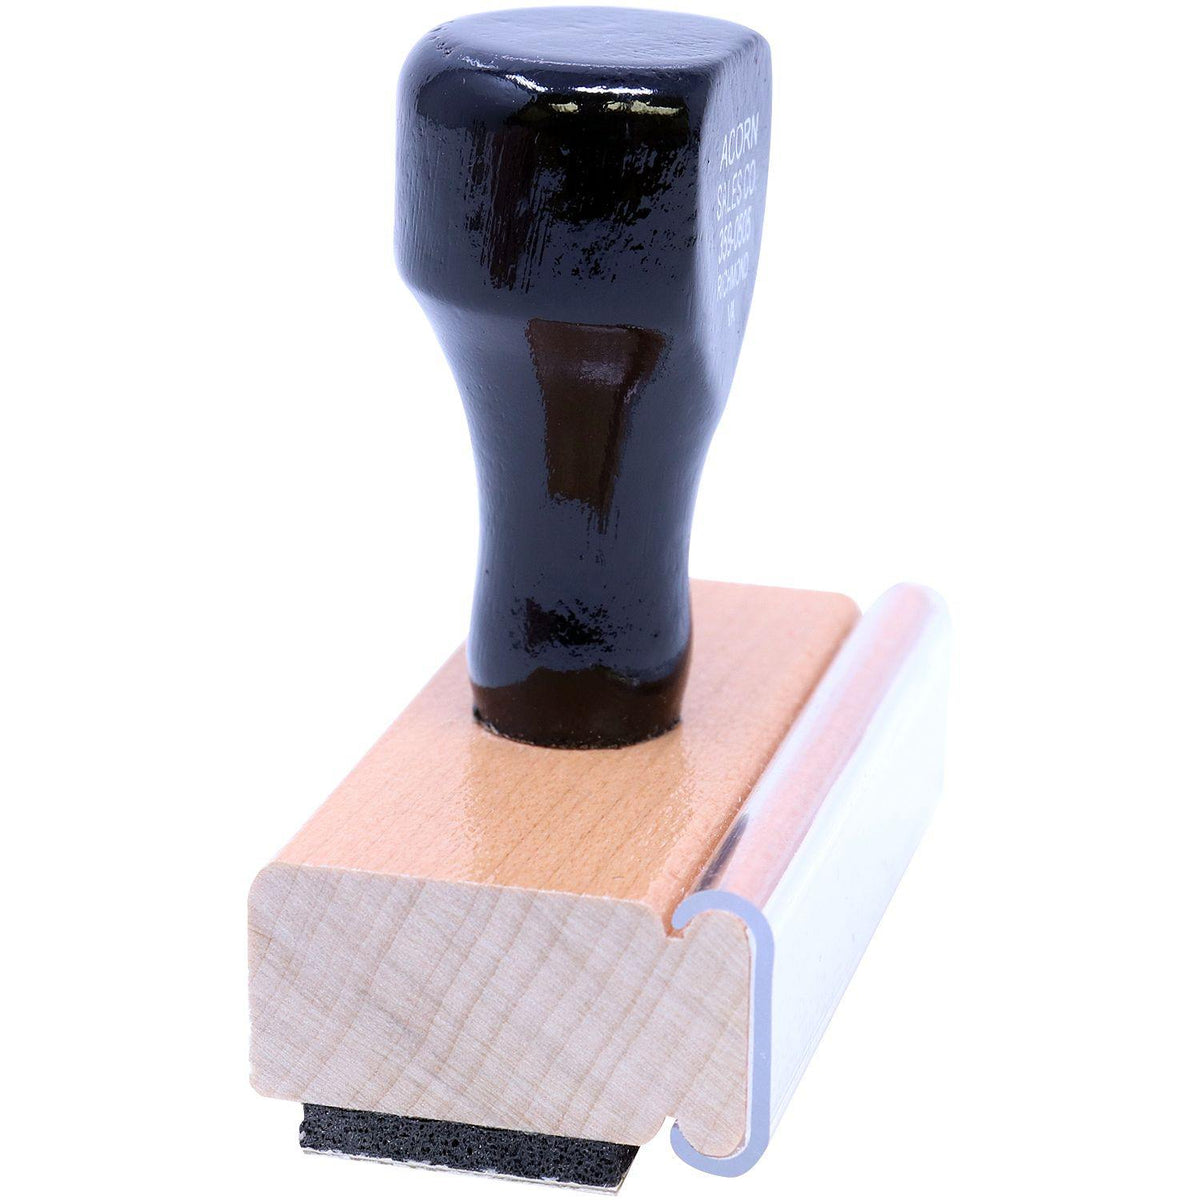 Side View of Large Application Complete Rubber Stamp at an Angle